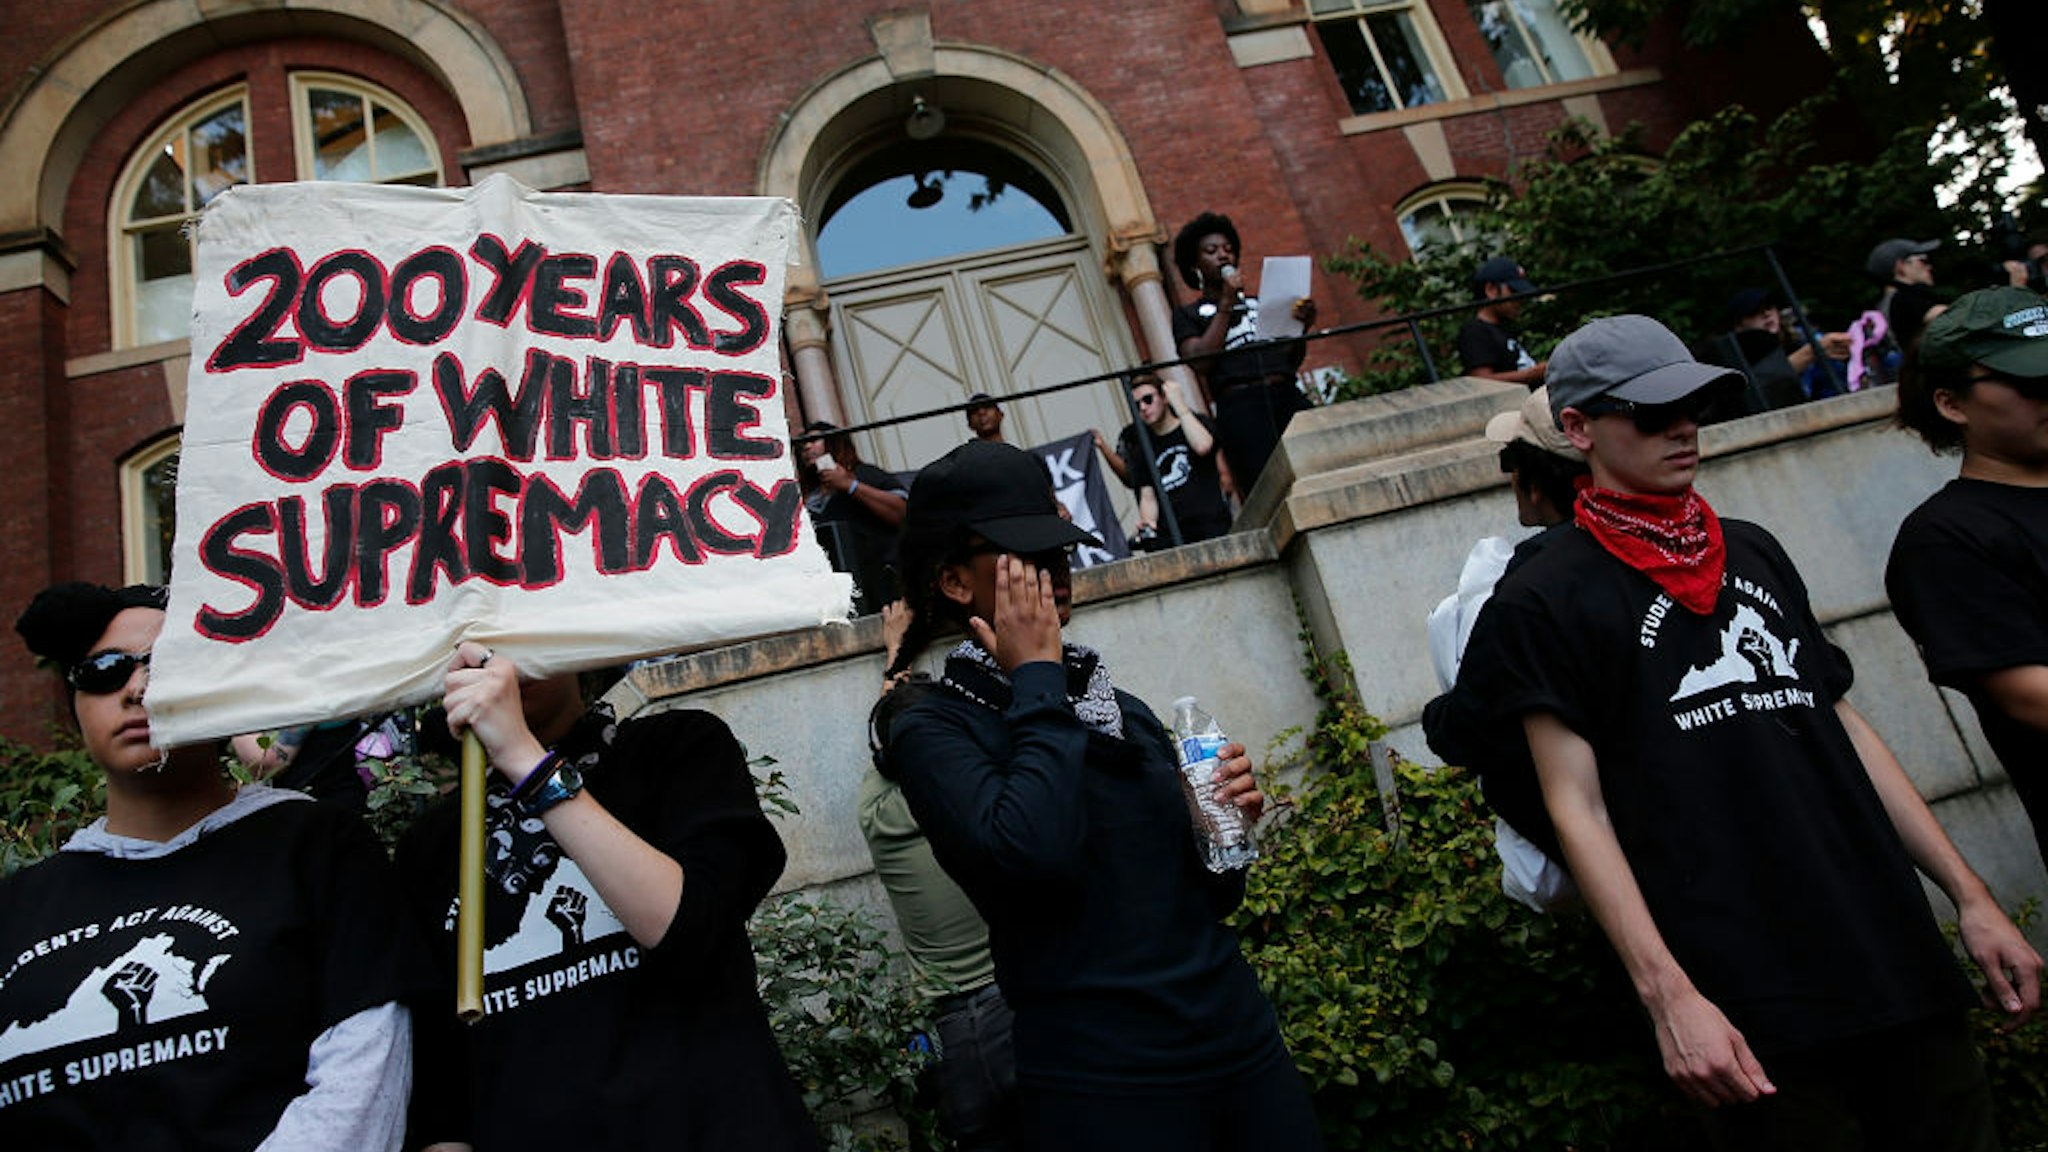 Protesters with the group Students Act Against White Supremacy speak on the campus of the University of Virginia during an event marking the one year anniversary of a deadly clash between white supremacists and counter protesters August 11, 2018 in Charlottesville, Virginia. Charlottesville has been declared in a state of emergency by Virginia Gov. Ralph Northam as the city braces for the one year anniversary of the deadly clash between white supremacist forces and counter protesters over the potential removal of Confederate statues of Robert E. Lee and Stonewall Jackson. A ÒUnite the RightÓ rally featuring some of the same groups is planned for tomorrow in Washington, DC.